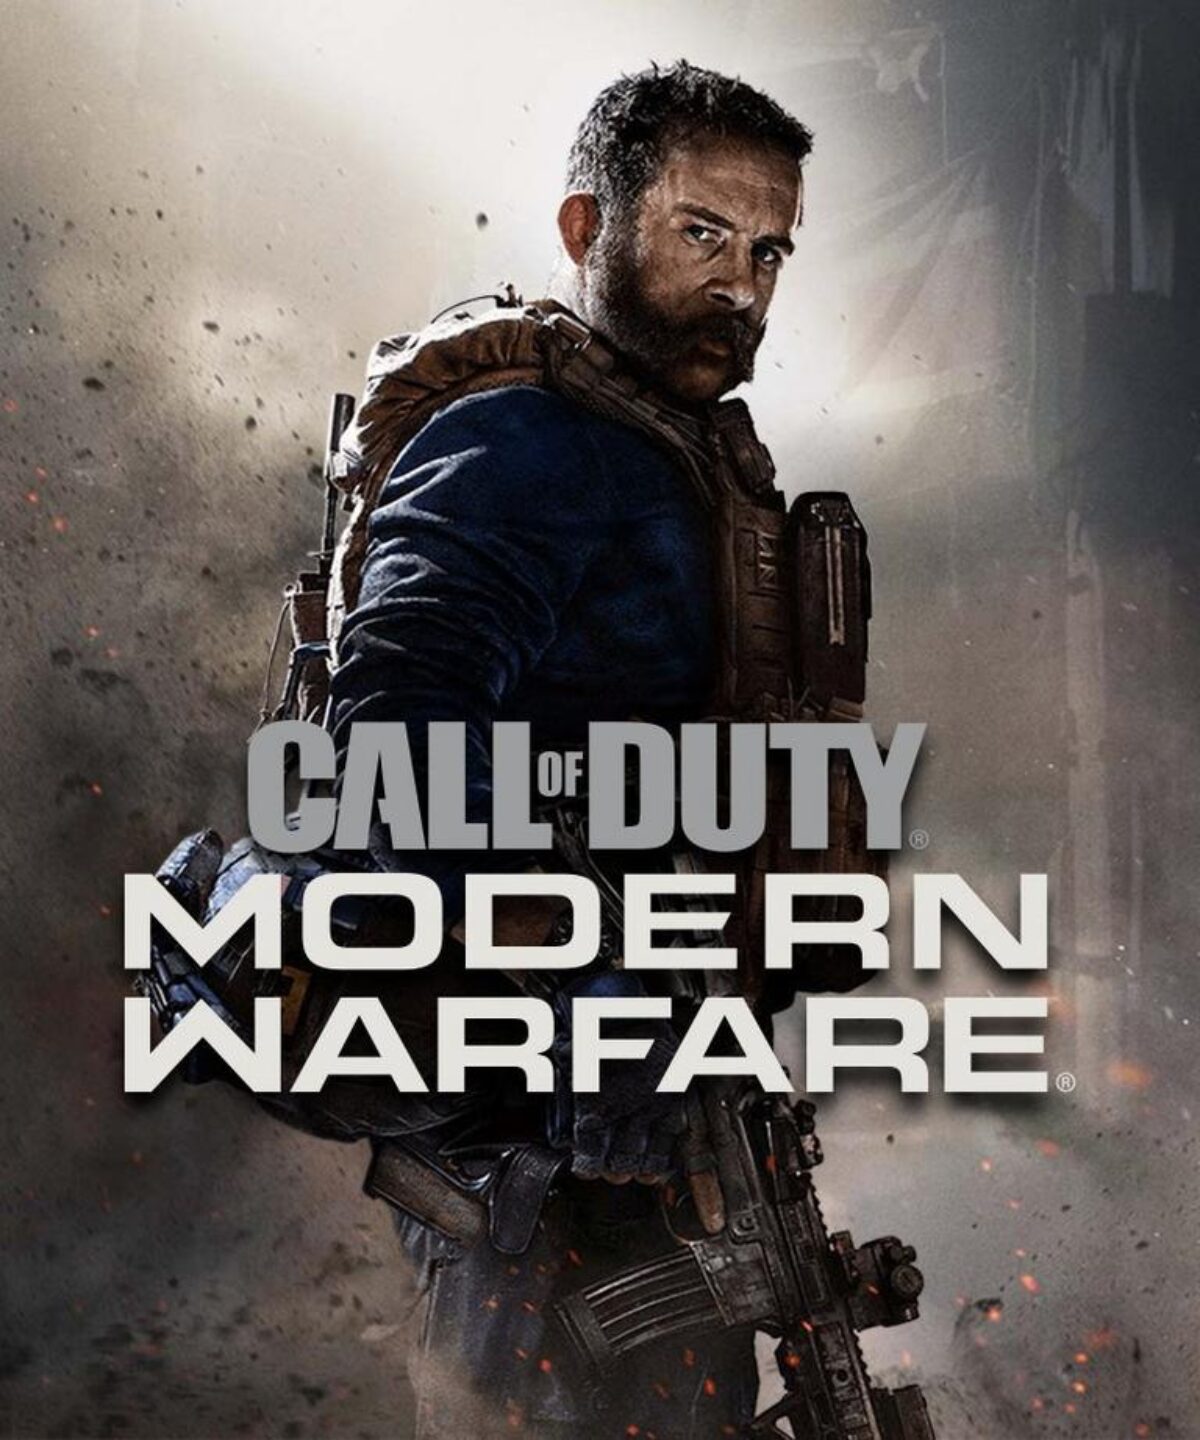 Call of Duty: Modern Warfare 2 Multiplayer Remaster Reportedly Canceled -  Gameranx